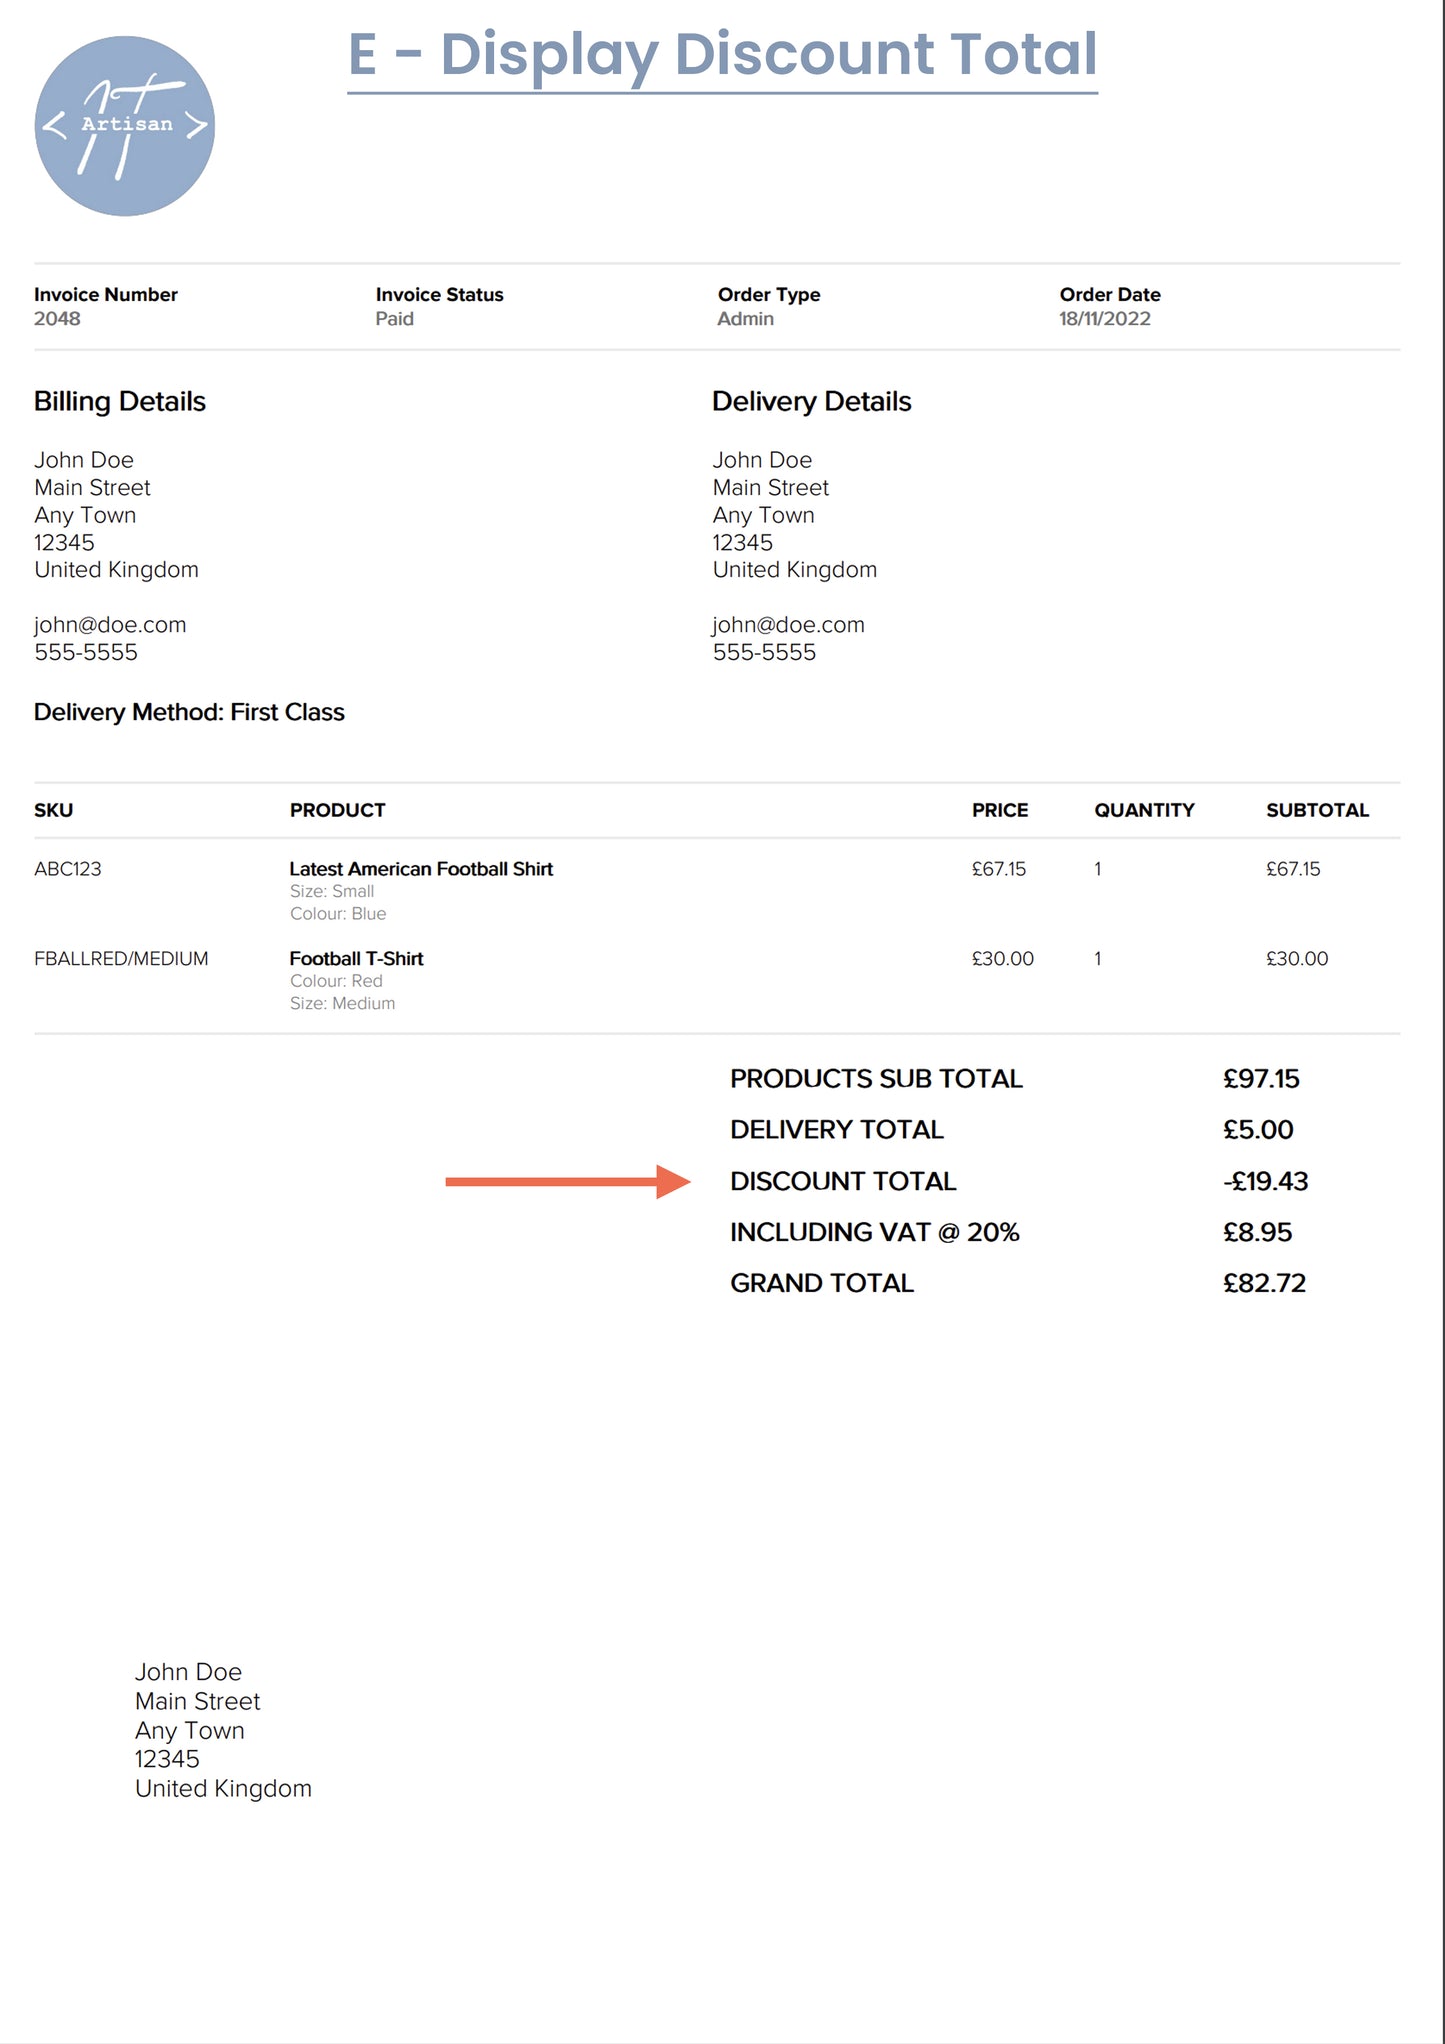 Discount Total displayed within the ShopWired order invoice